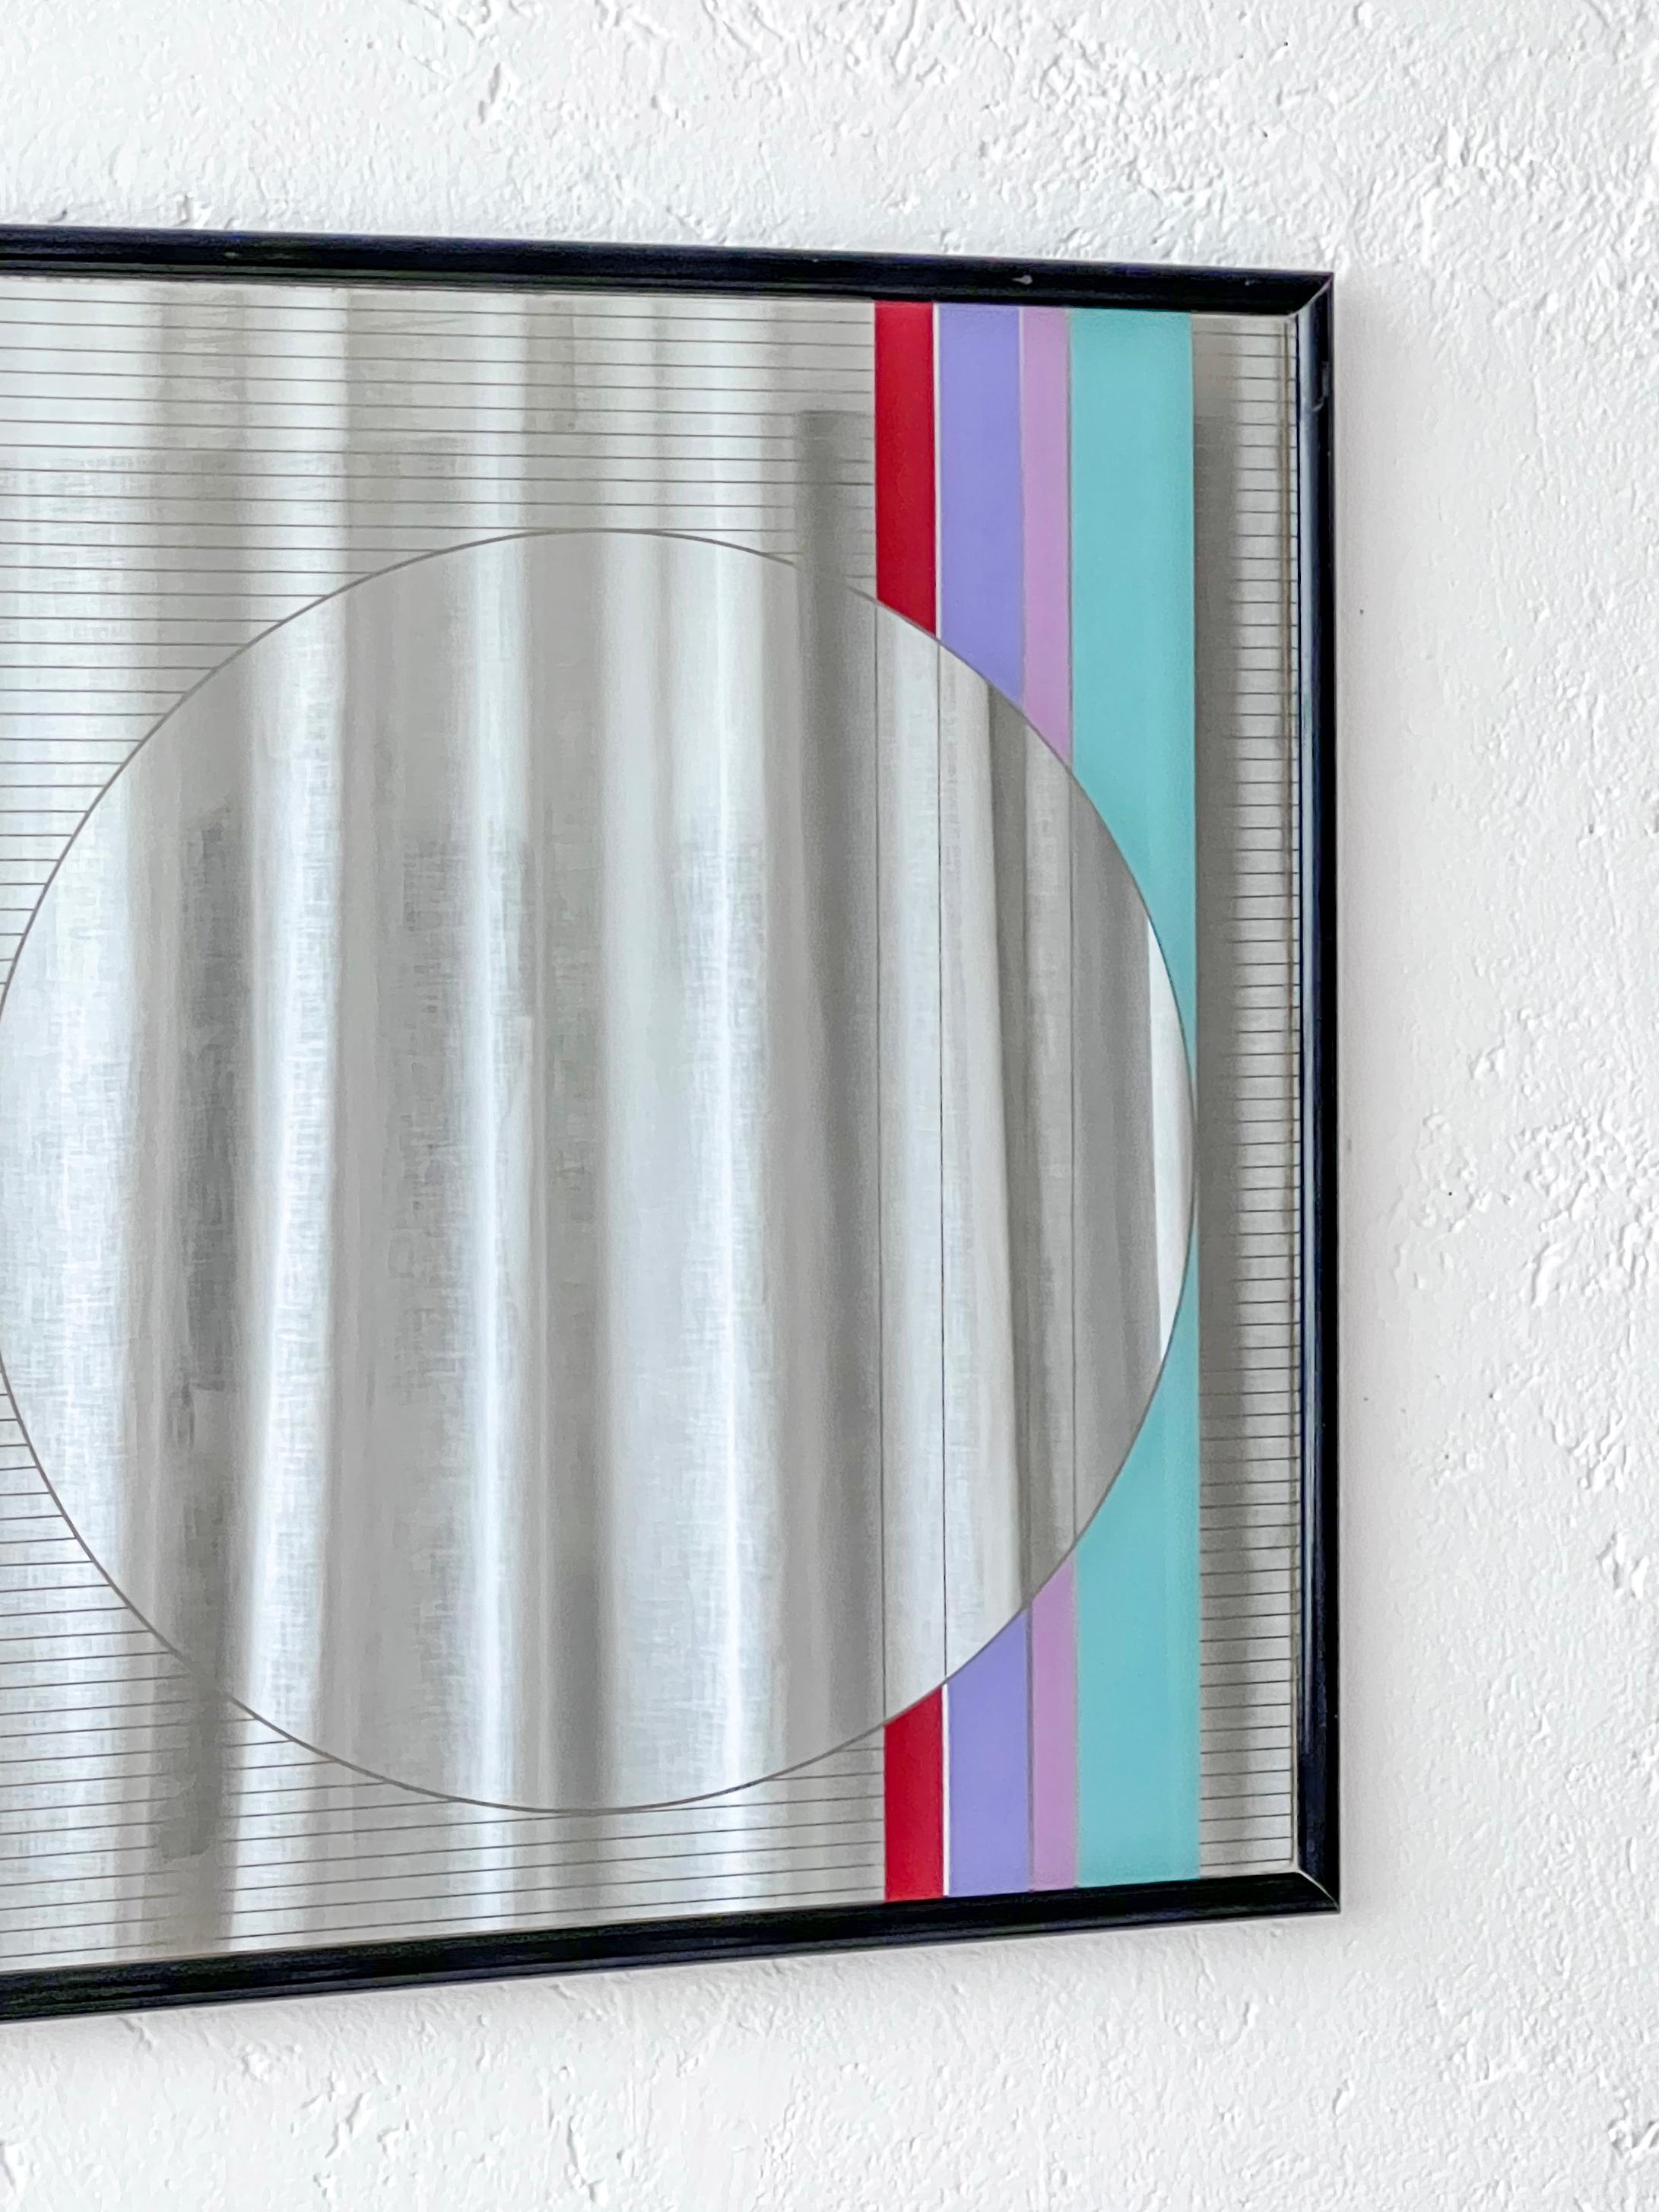 Decorative geometric wall mirror by Italian artist Eugenio Carmi for furniture brand Acerbis. Designed in the 1980s and named 